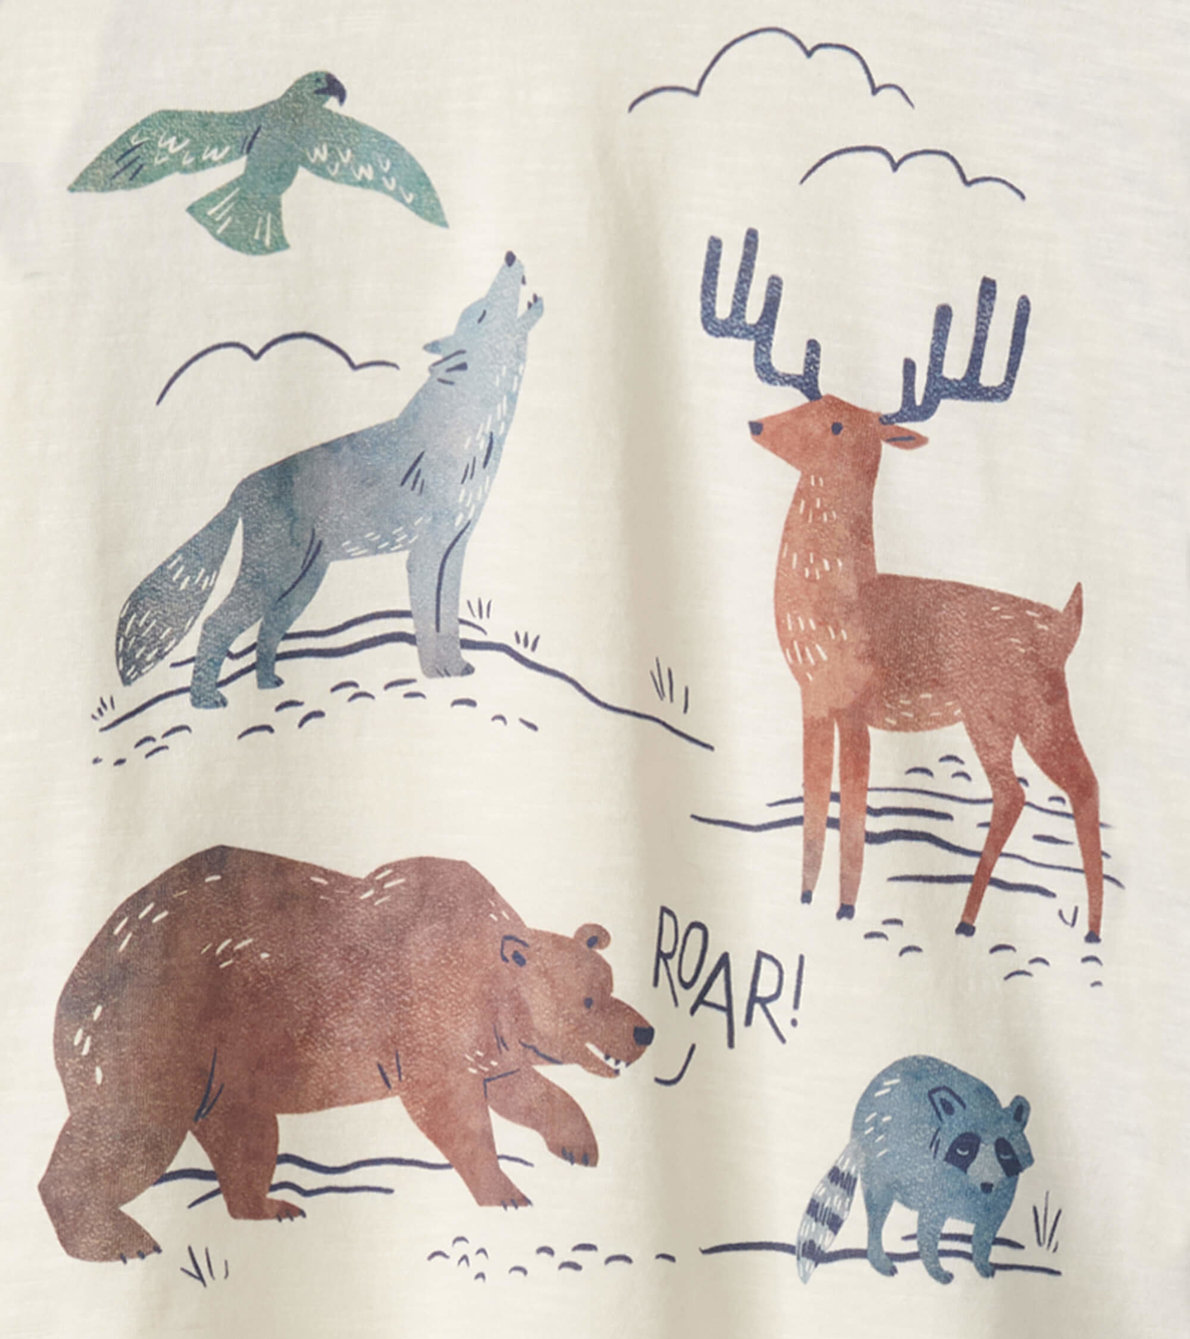 View larger image of Winter Forest Long Sleeve T-Shirt